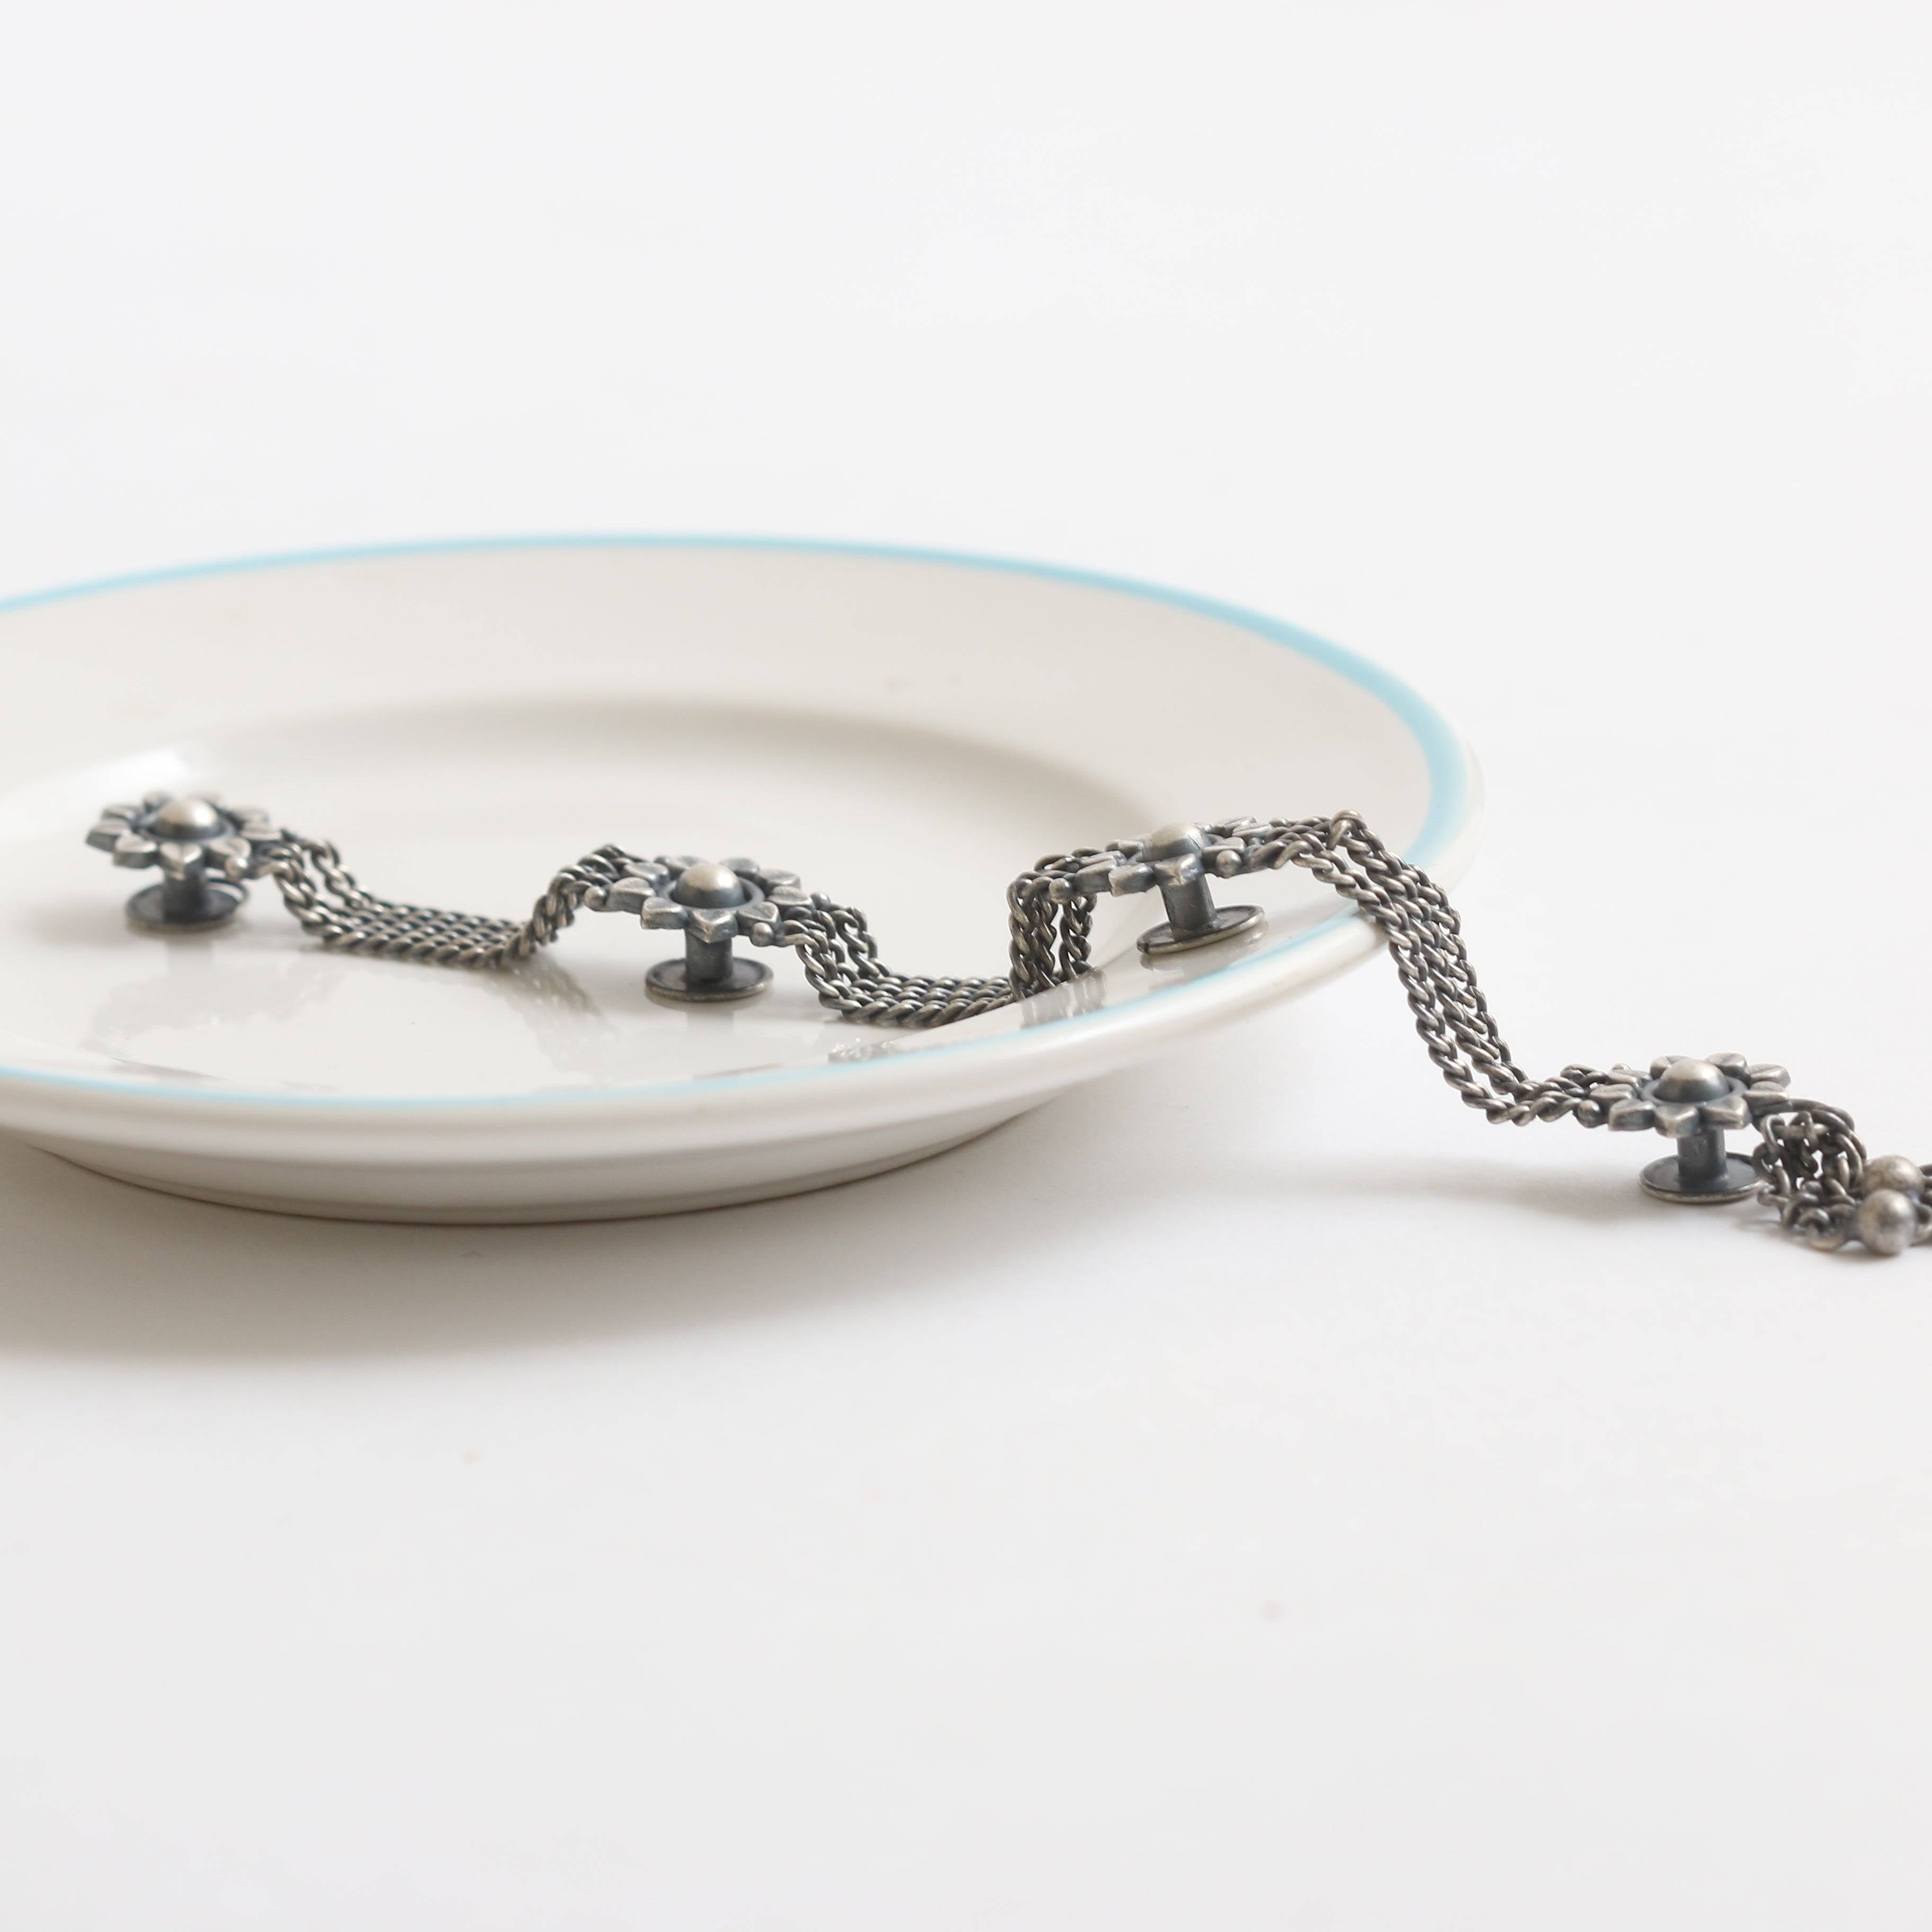 a white plate with a chain on it